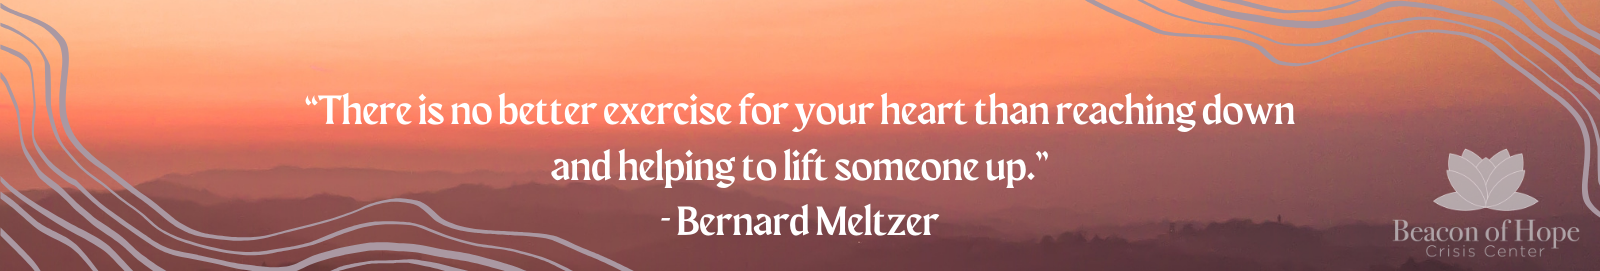 “There is no better exercise for your heart than reaching down and helping to lift someone up.” - Bernard Meltzer